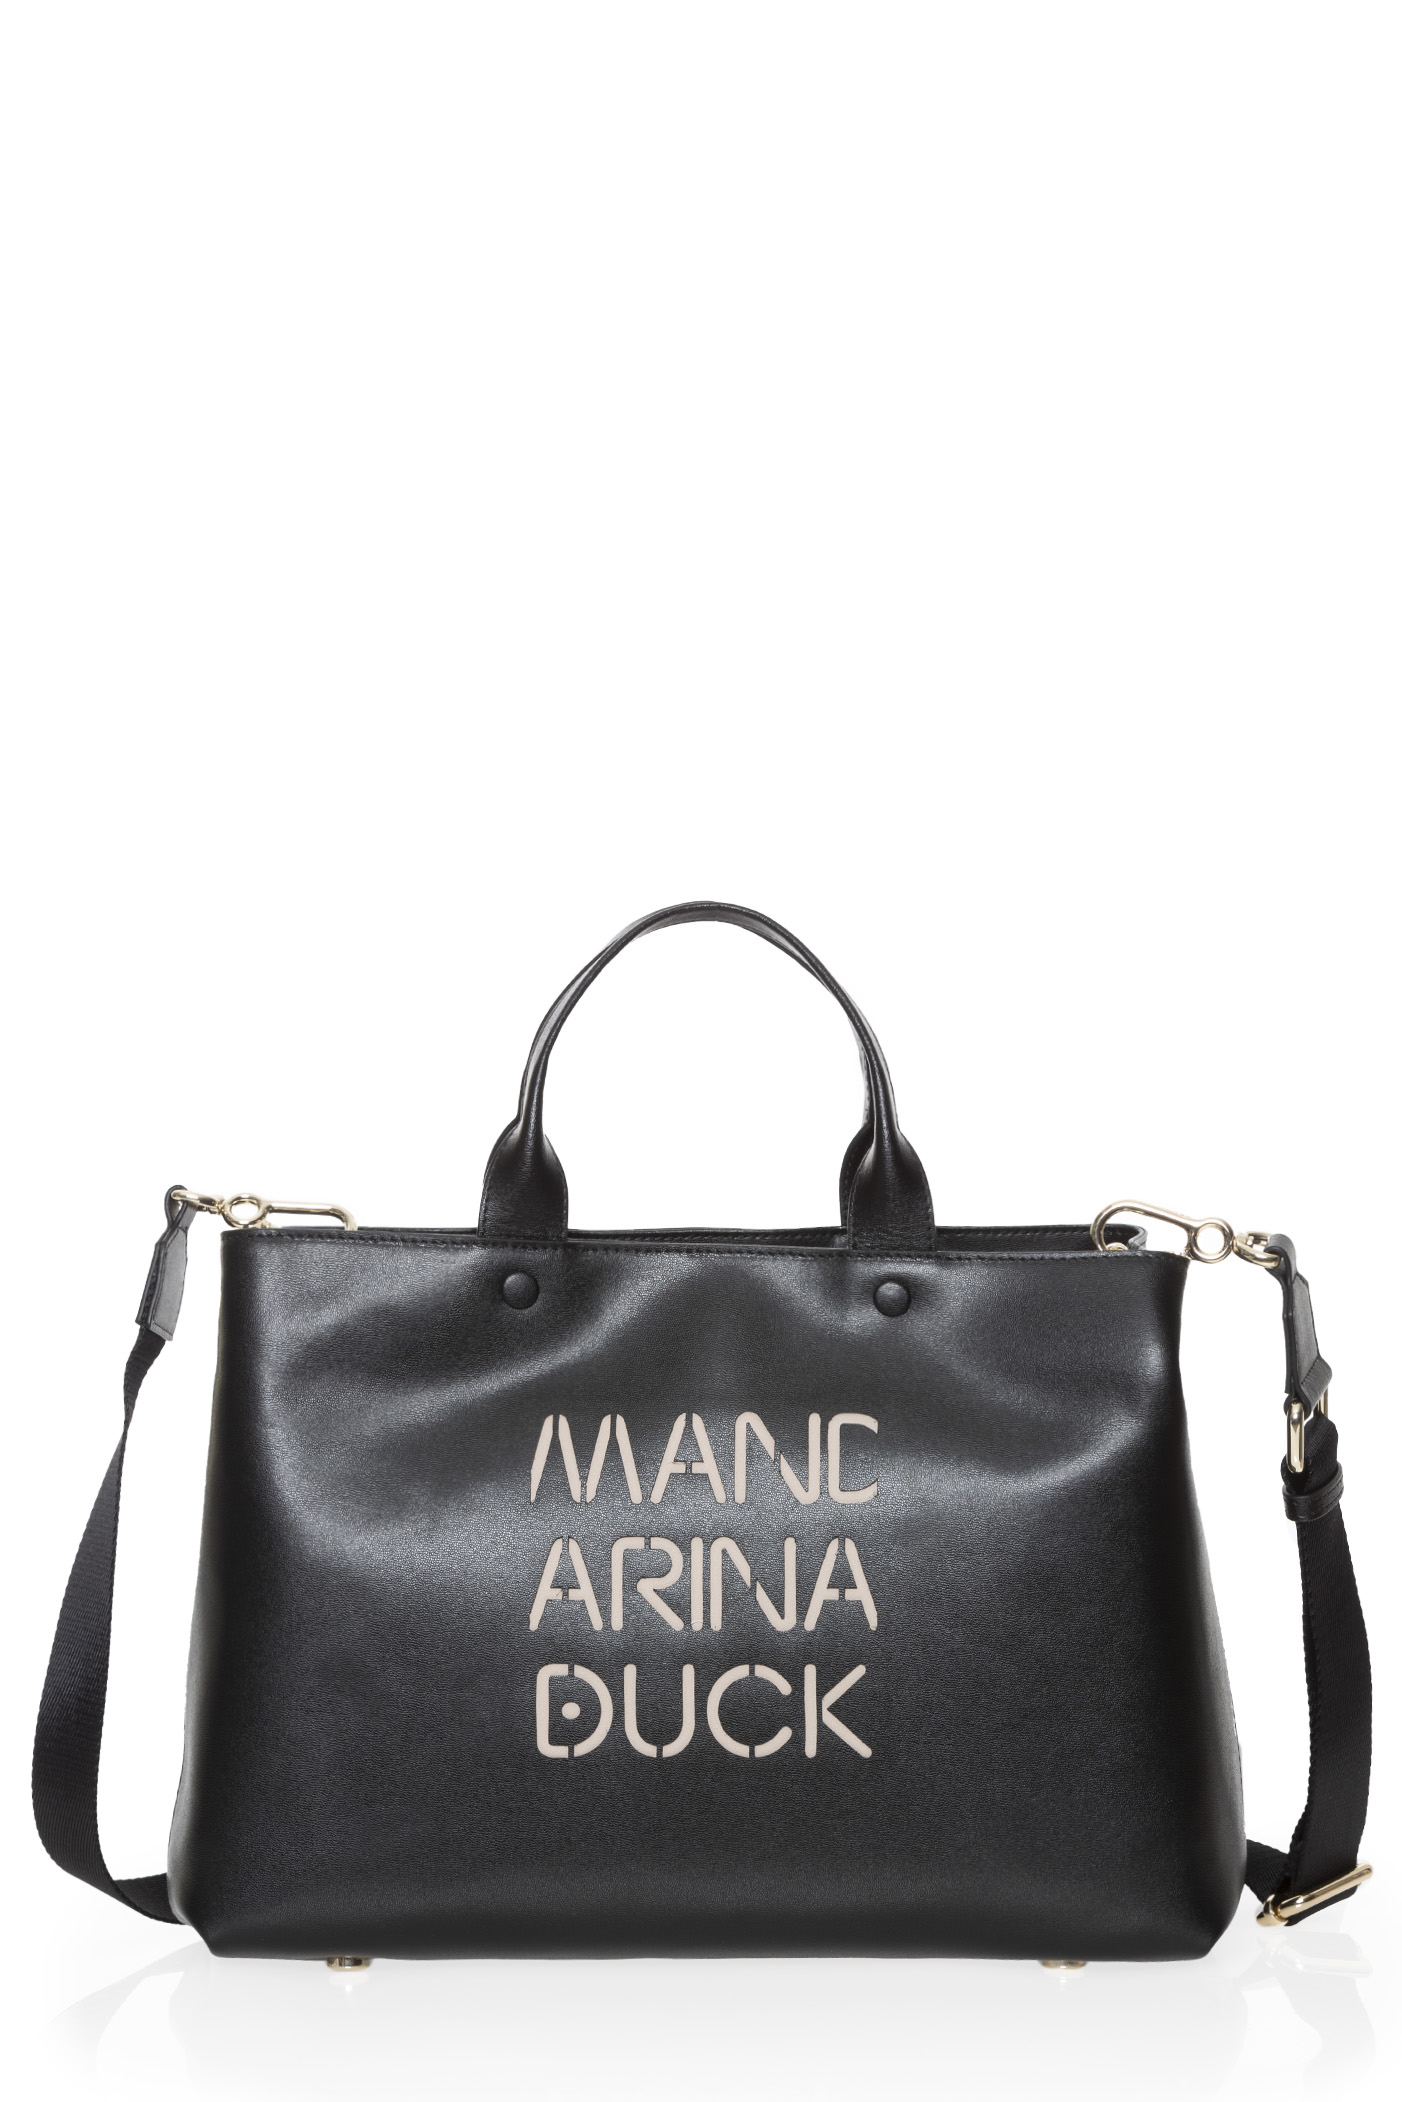 LADY DUCK TOTE